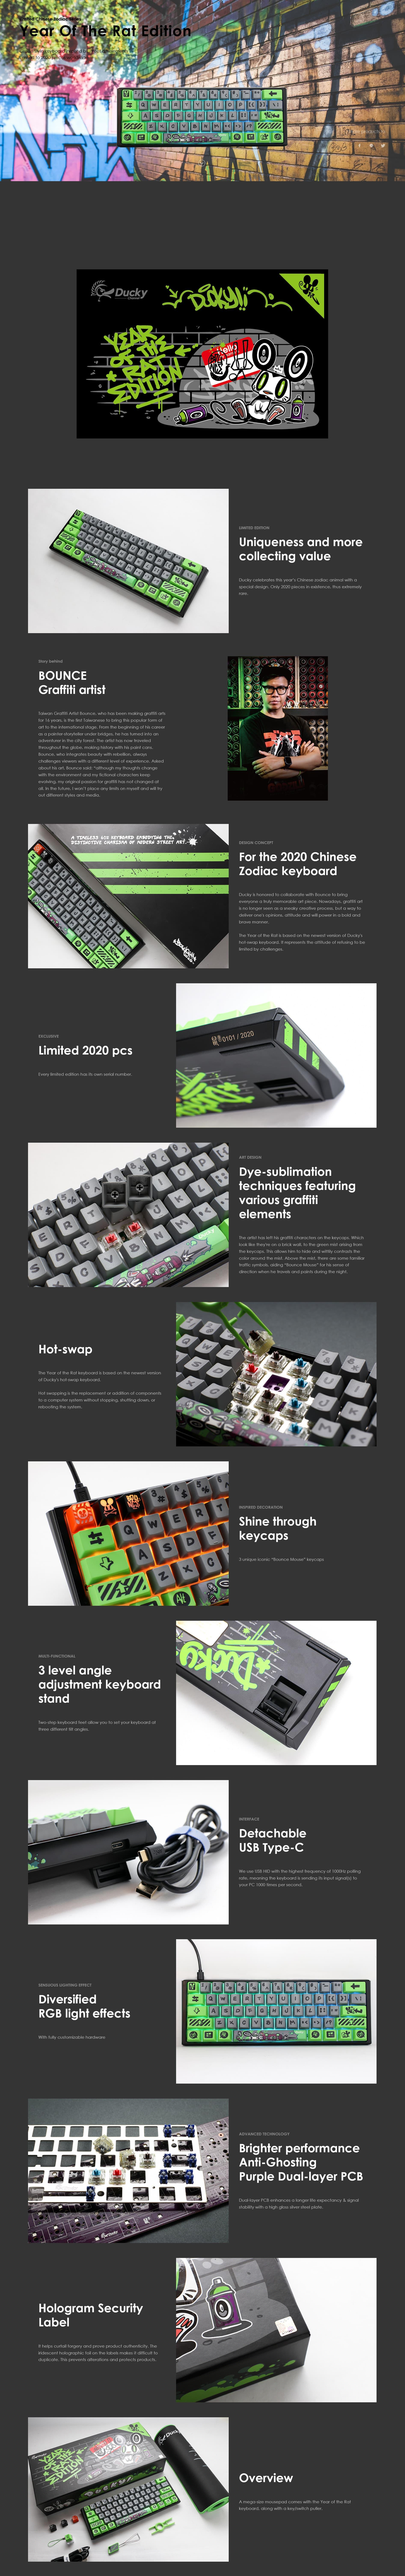 Ducky Year of the Rat Mechanical Keyboard with Cherry MX Brown Key Switches